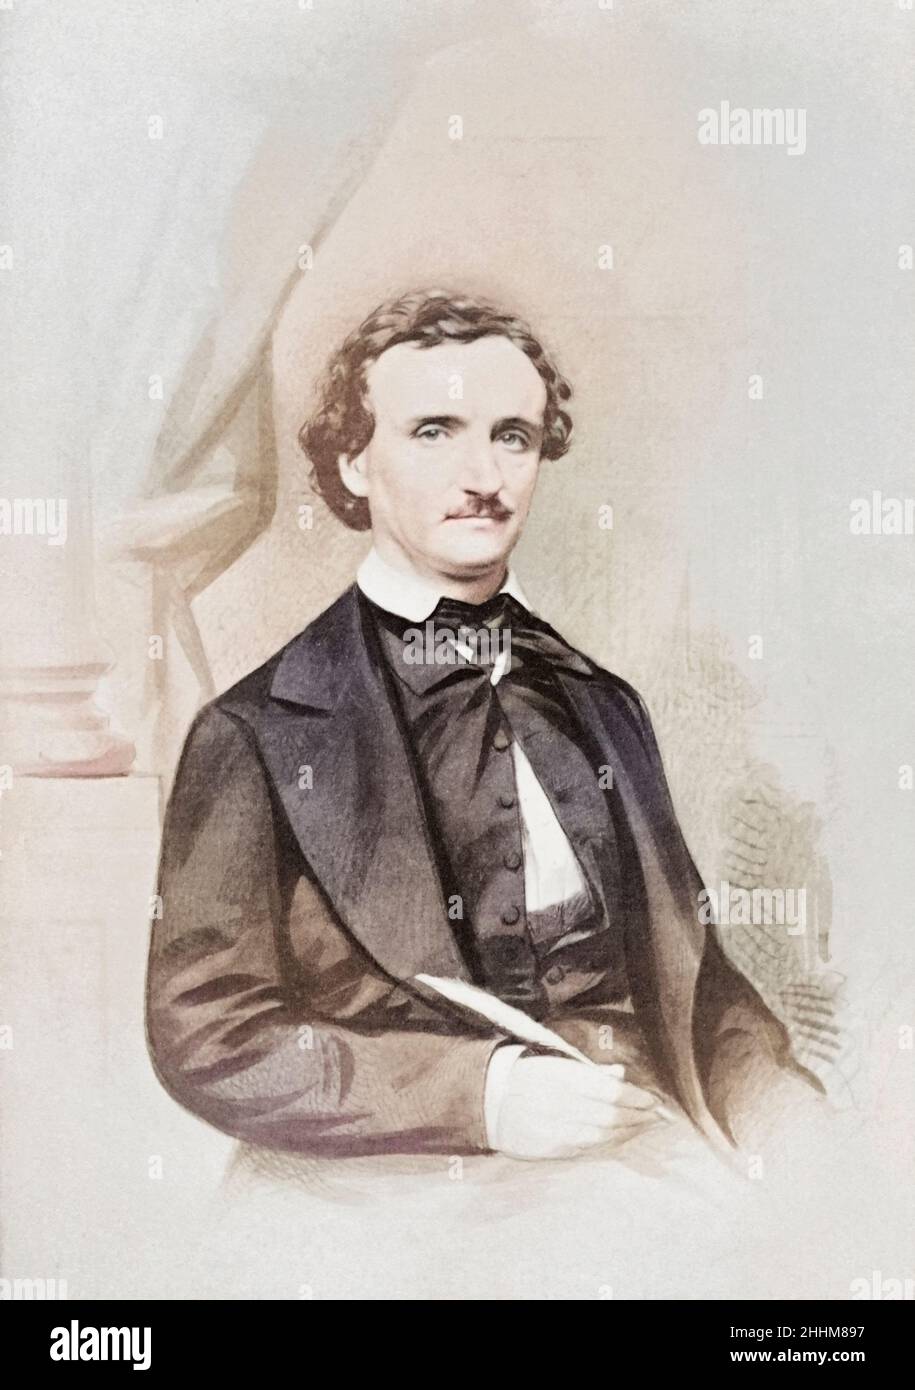 Edgar Allen Poe, 1809 - 1849.  American author, famous for such stories as The Pit and the Pendalum and The Murders in the Rue Morgue.  After a 19th century portrait.  Later colorization. Stock Photo